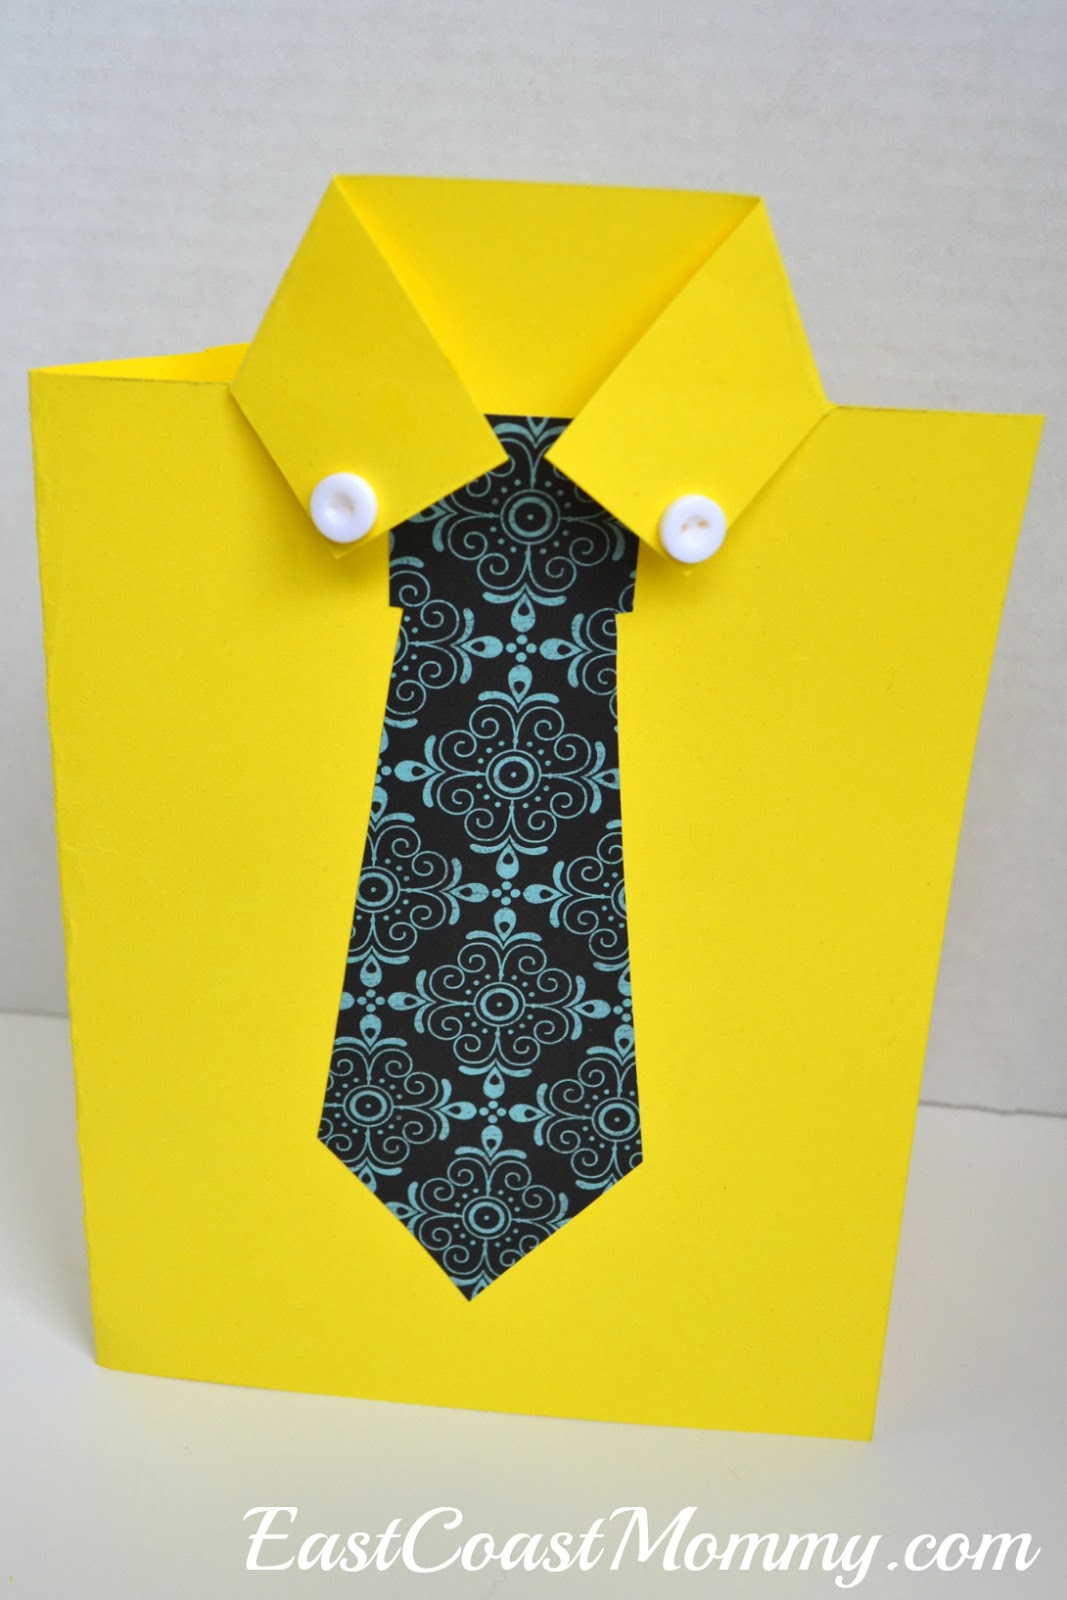 east-coast-mommy-shirt-and-tie-father-s-day-card